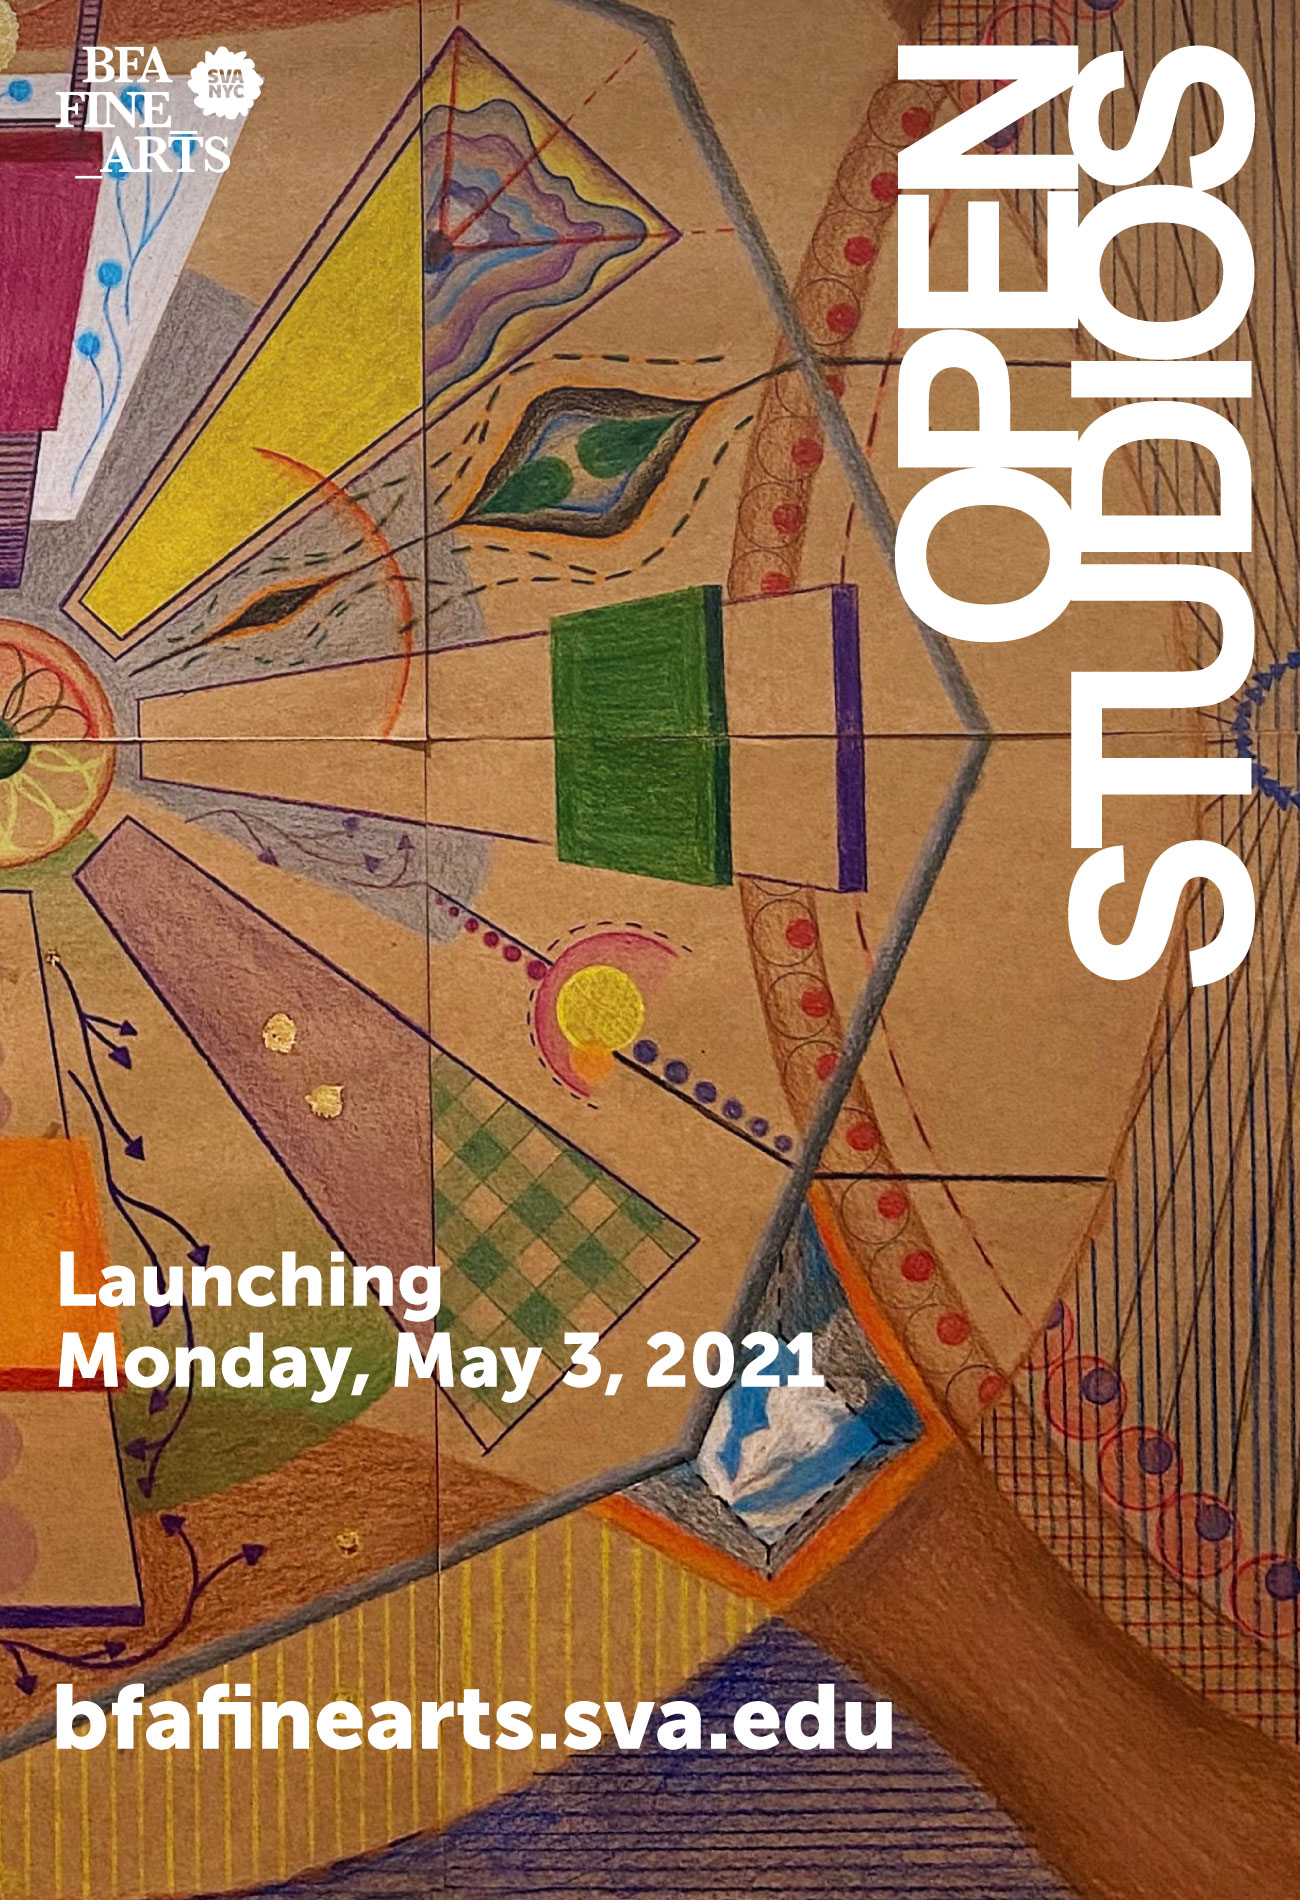 A poster advertisement for the 2021 Spring Open Studios event at SVA